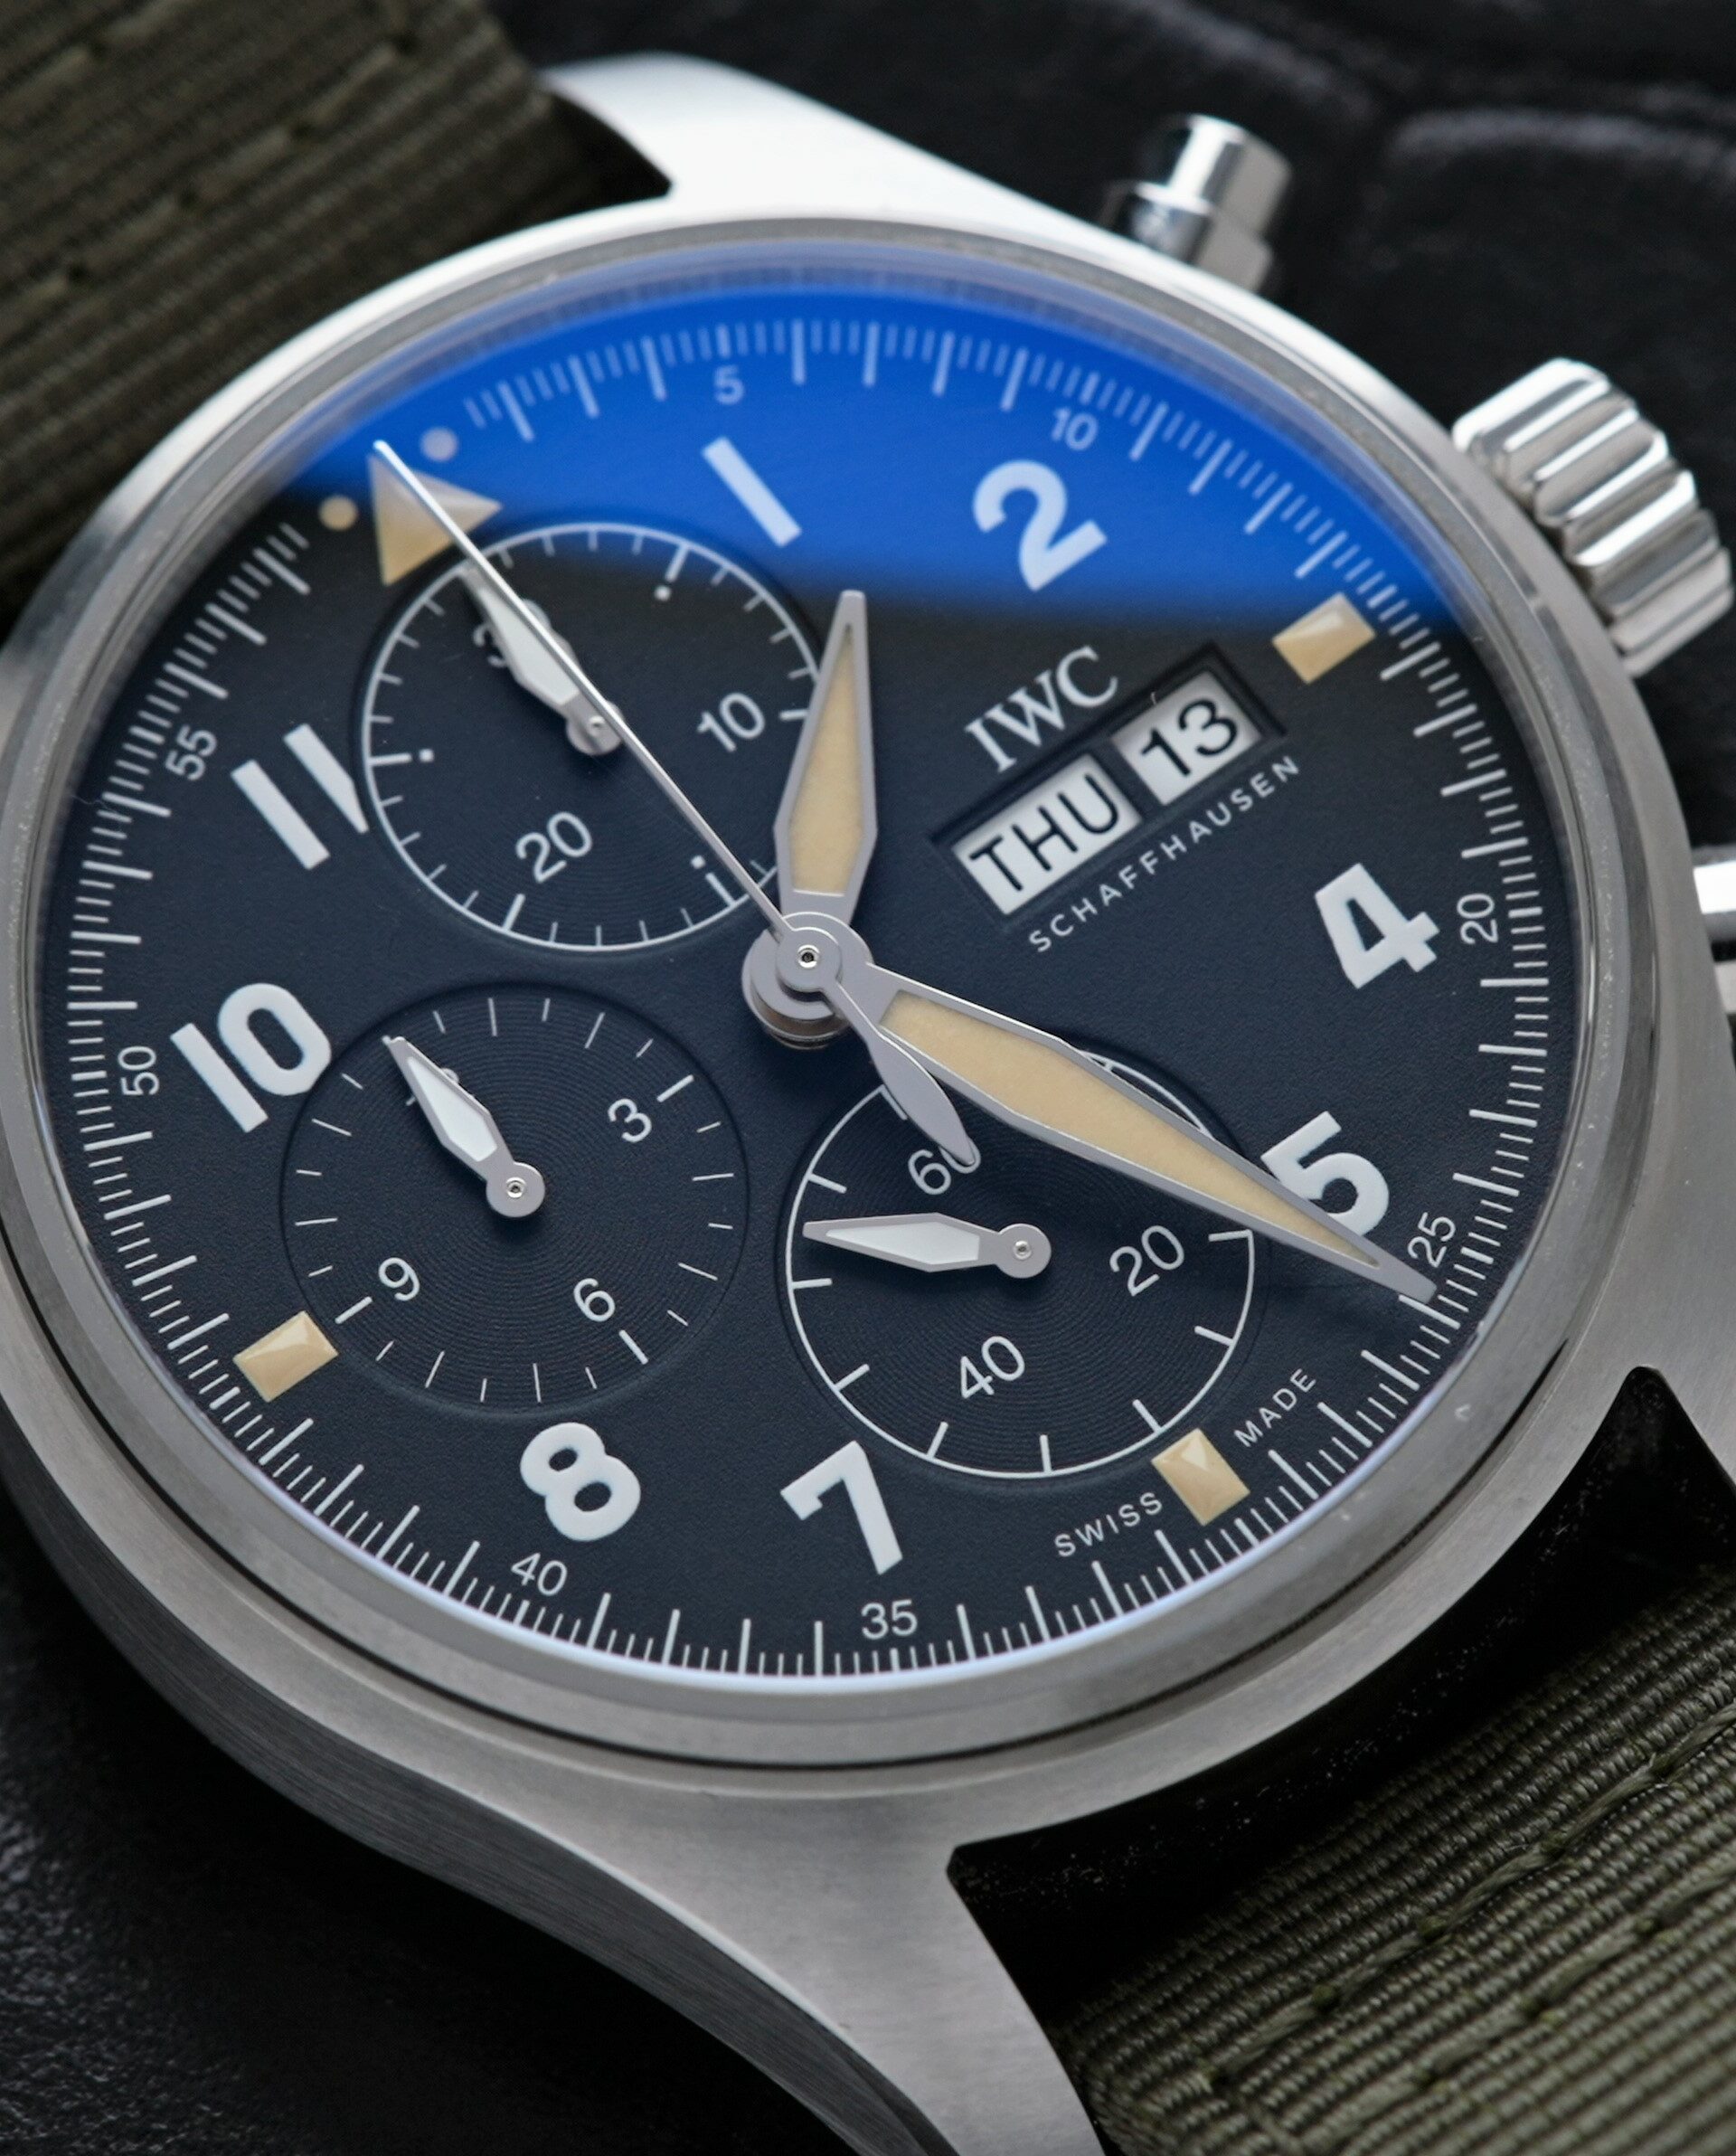 Close up shot of the dial on the IWC Pilot Spitfire Chronograph 41MM IW387901 wristwatch.